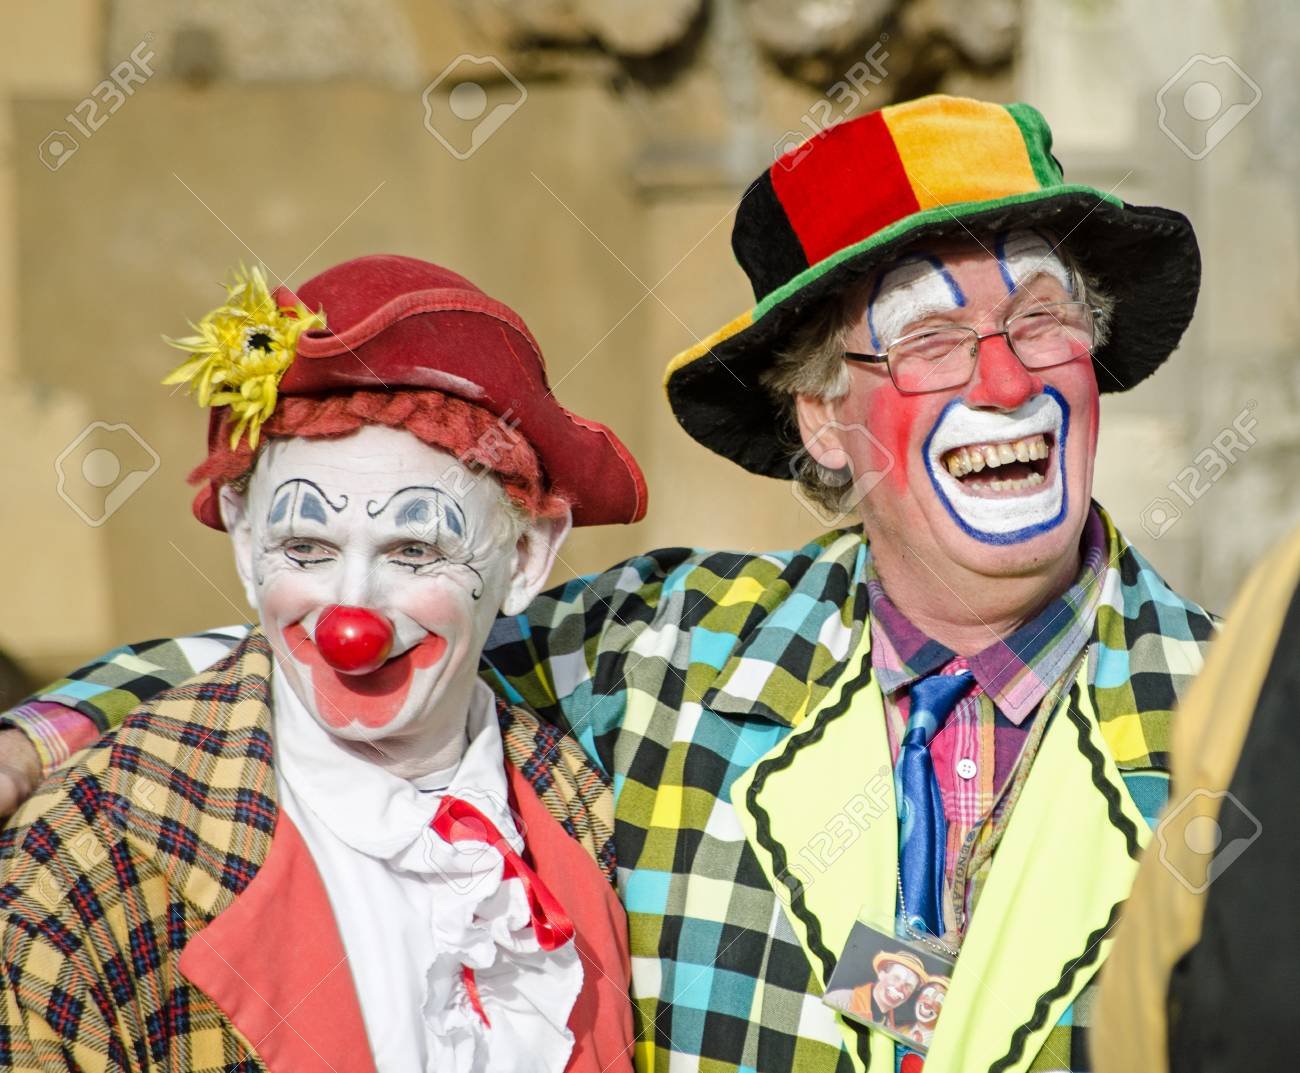 50x41-123573425-london-uk-february-7-2016-two-clowns-sharing-a-joke-ahead-of-the-annual-church-service-in-memory-of-1.jpg